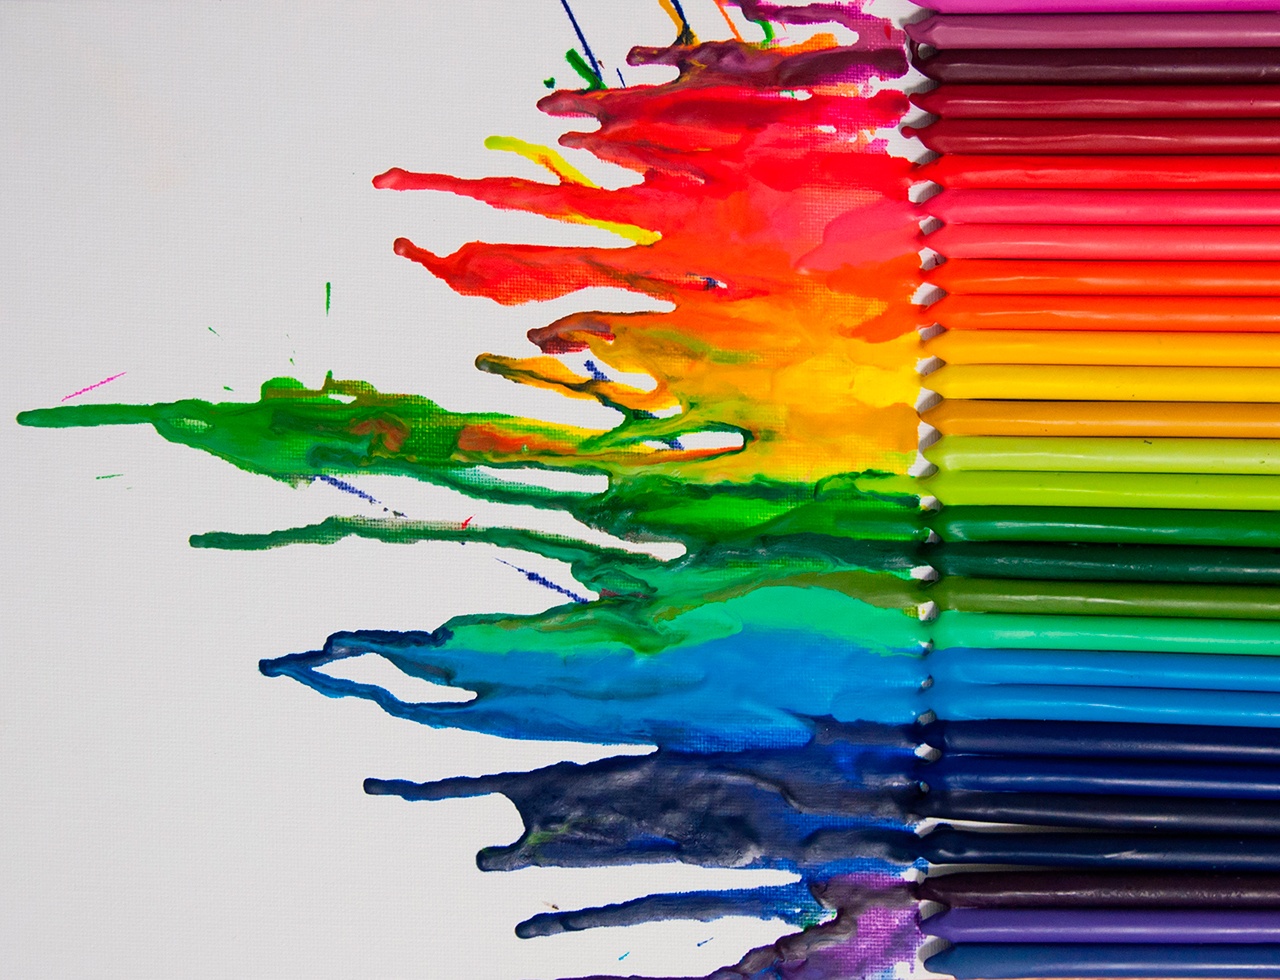 Melting down crayons and using them to make makeup is not recommended. (Dreamstime)